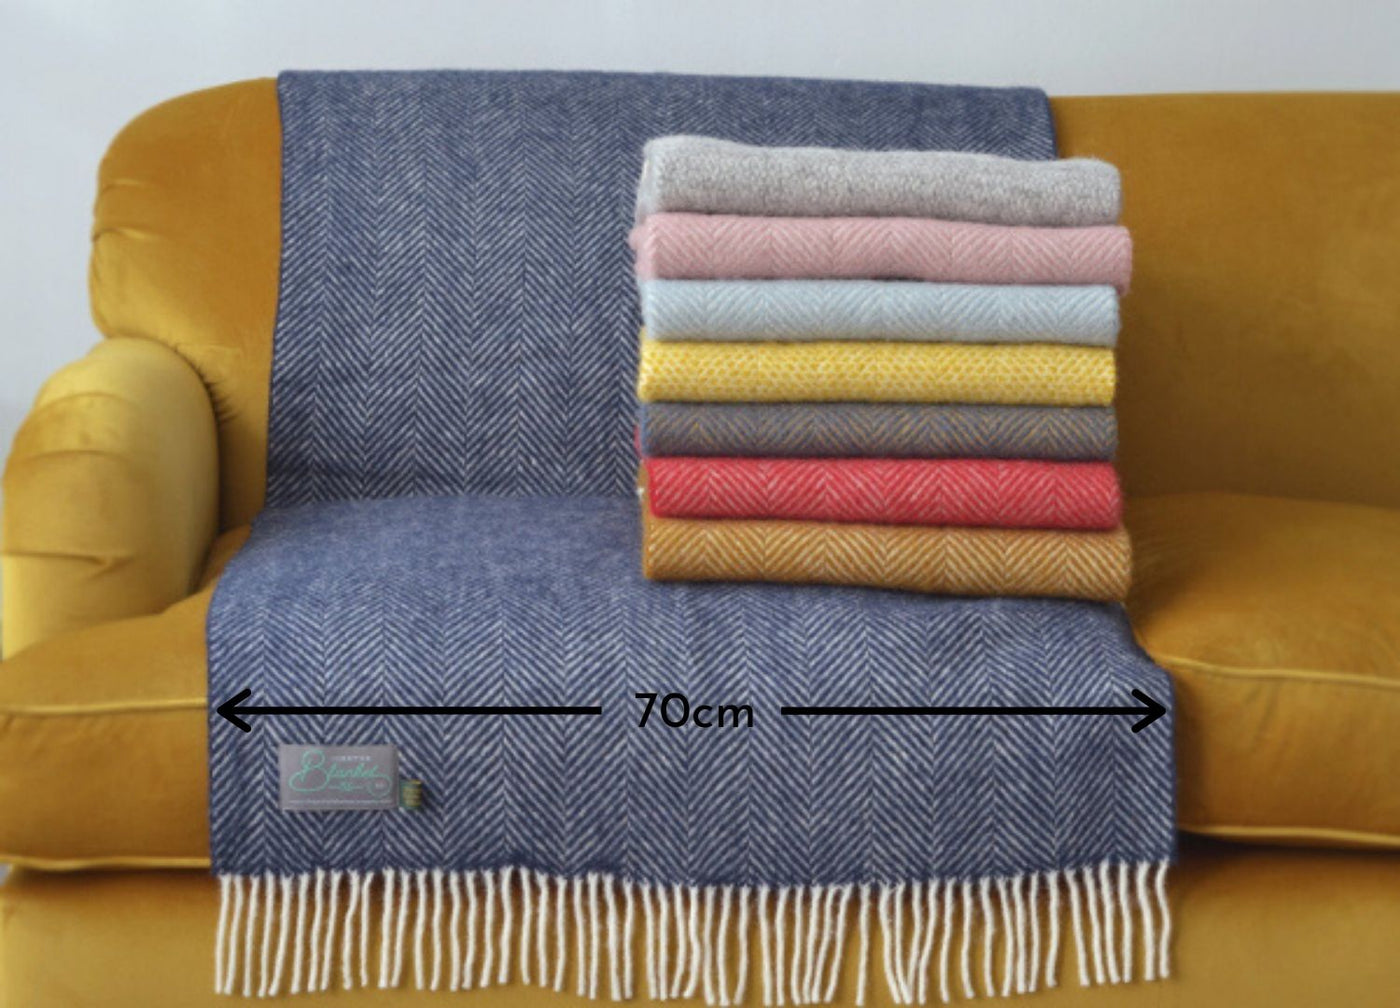 A stack of folded wool throws on a yellow sofa. A blue wool blanket measuring 70 centimeters in width is draped on the sofa